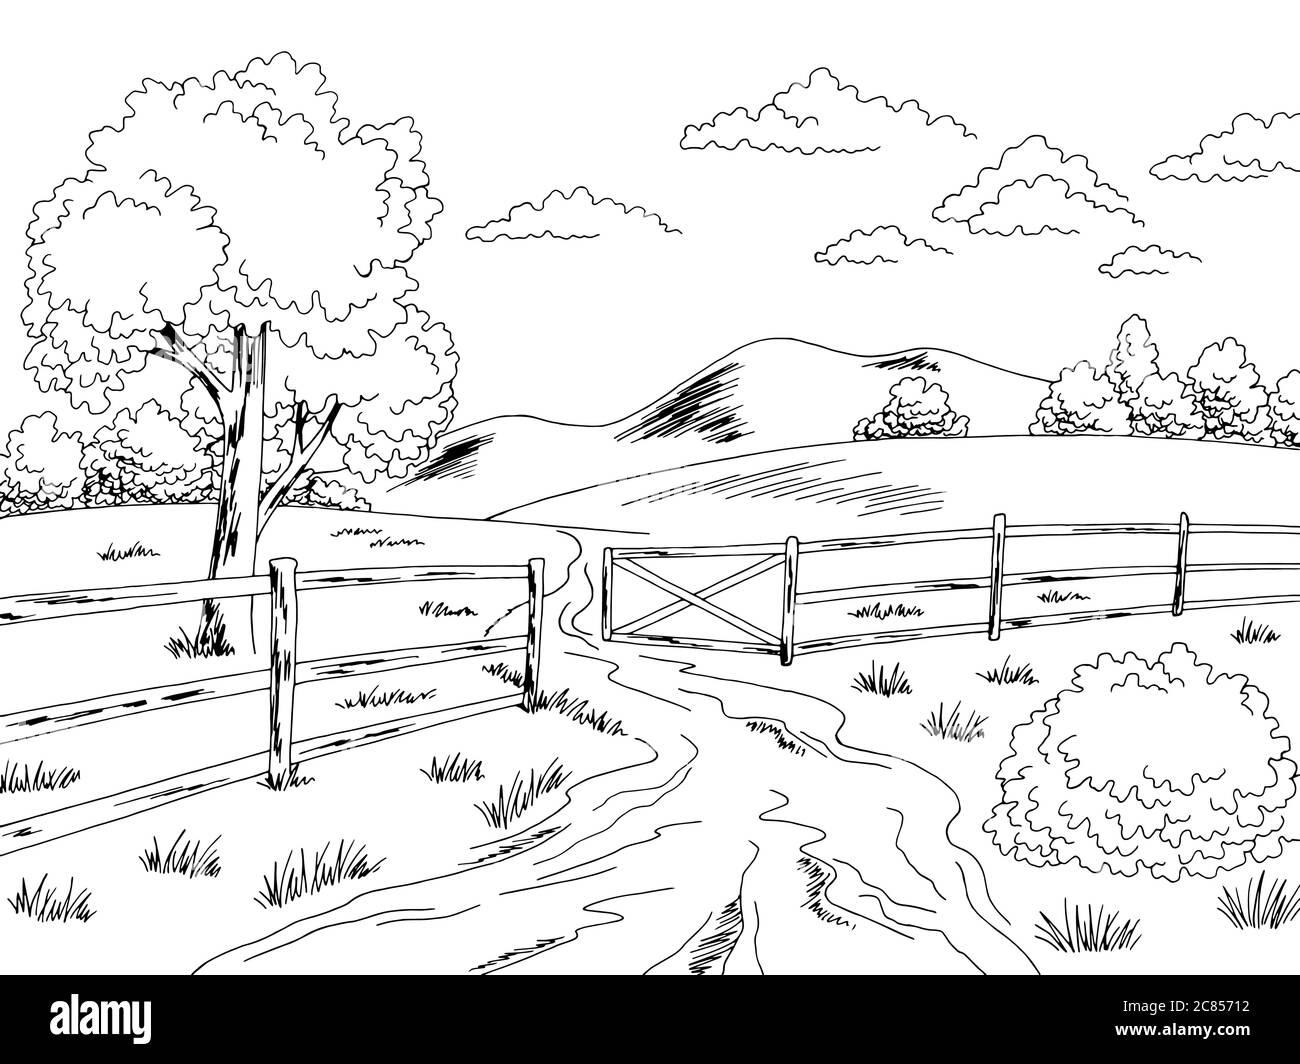 Fence Drawing Images  Free Download on Freepik